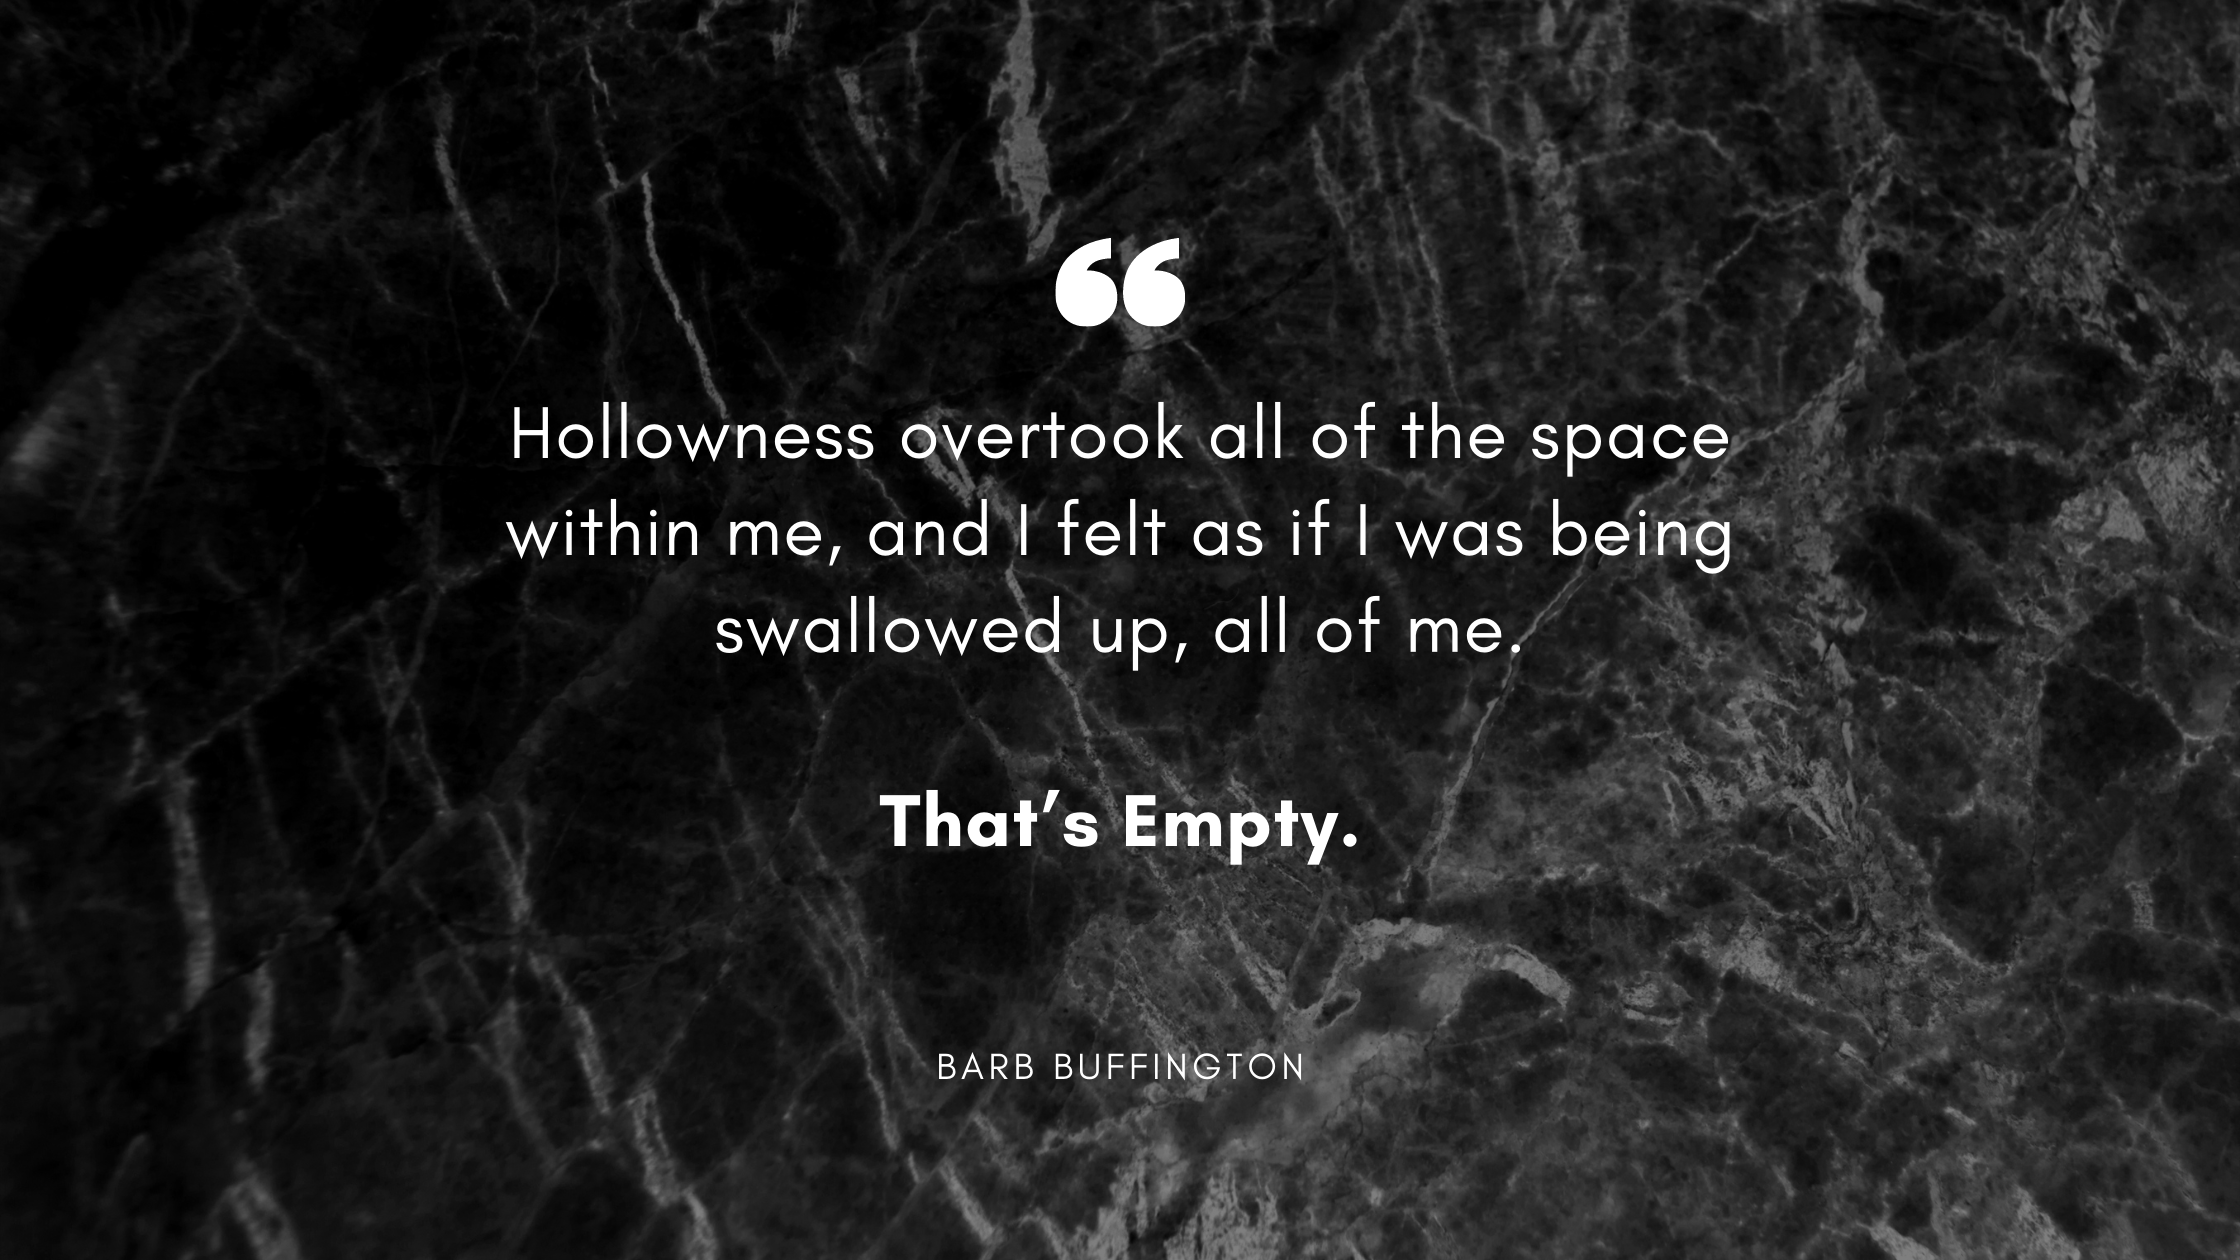 hollowness overtook all of the space within me, and I felt as if I was being swallowed up, all of me. That’s Empty